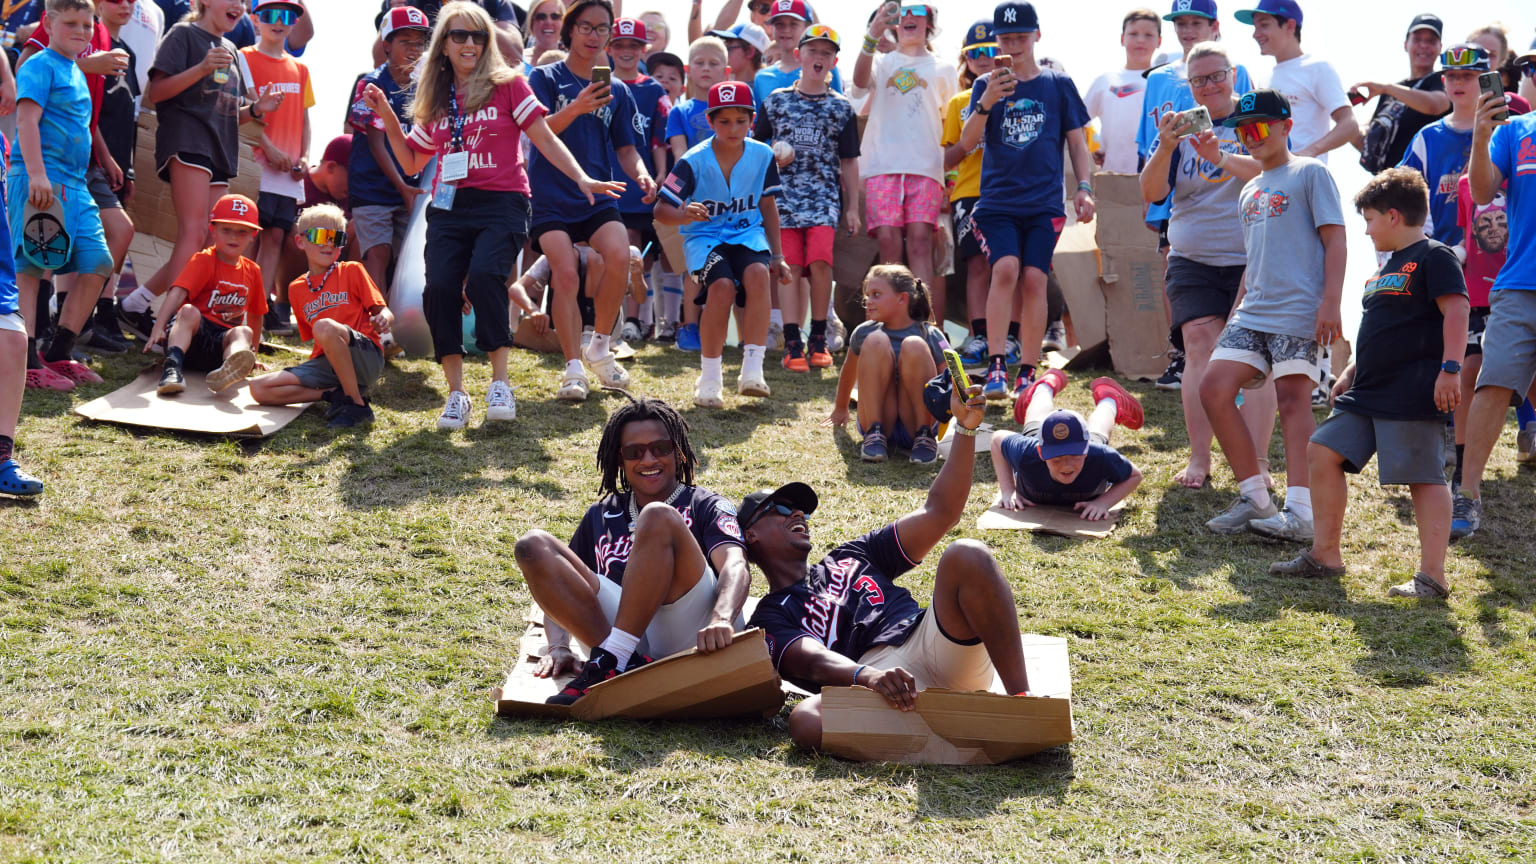 CJ Abrams and Jeter Downs slide down a hill on pieces of cardboard